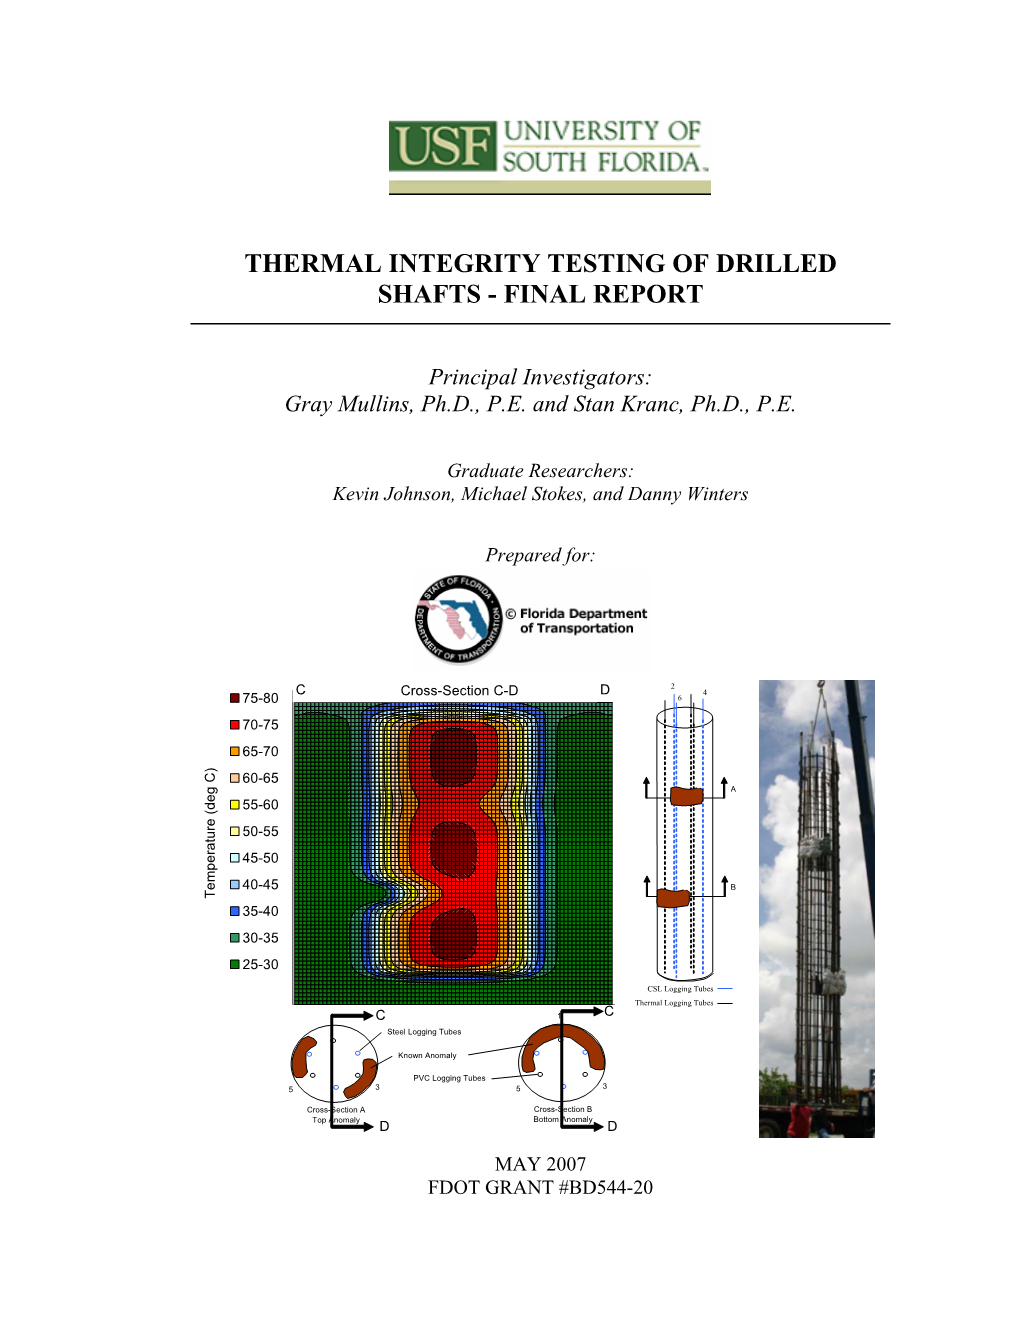 Thermal Integrity Testing of Drilled Shafts - Final Report